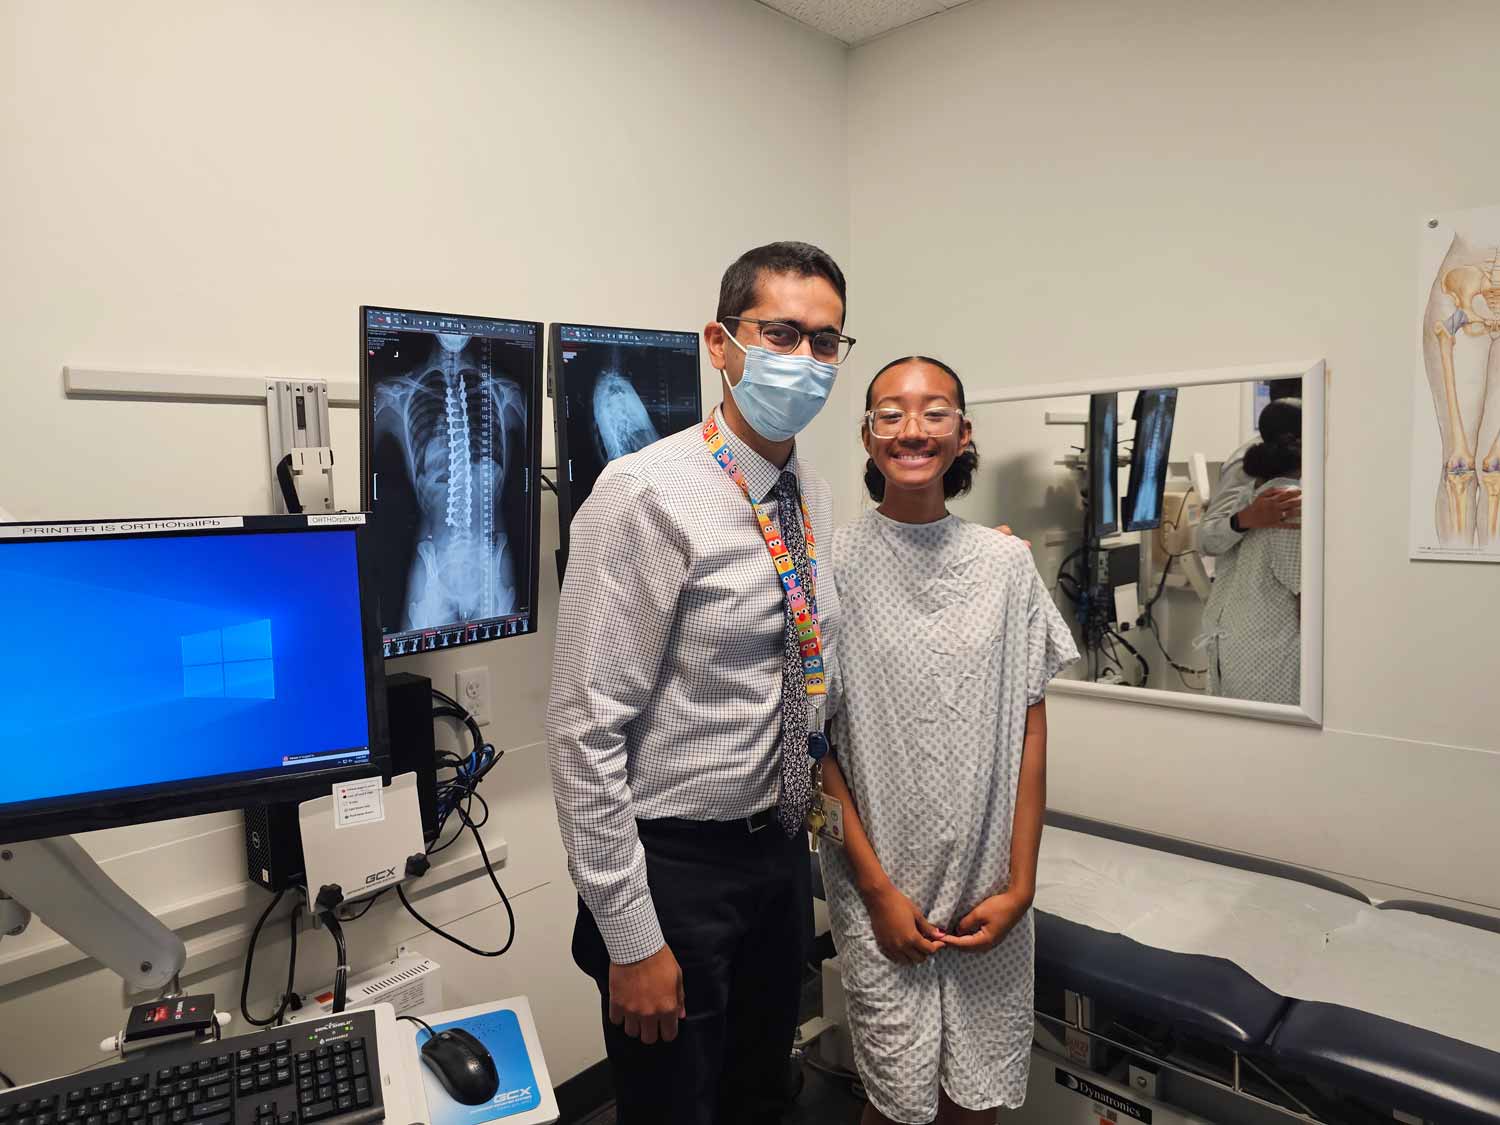 Dr. Ishaan Swarup poses for a photo with patient Malaya in an examination room. Behind them are computer screens showing x-rays of Malaya's spine.